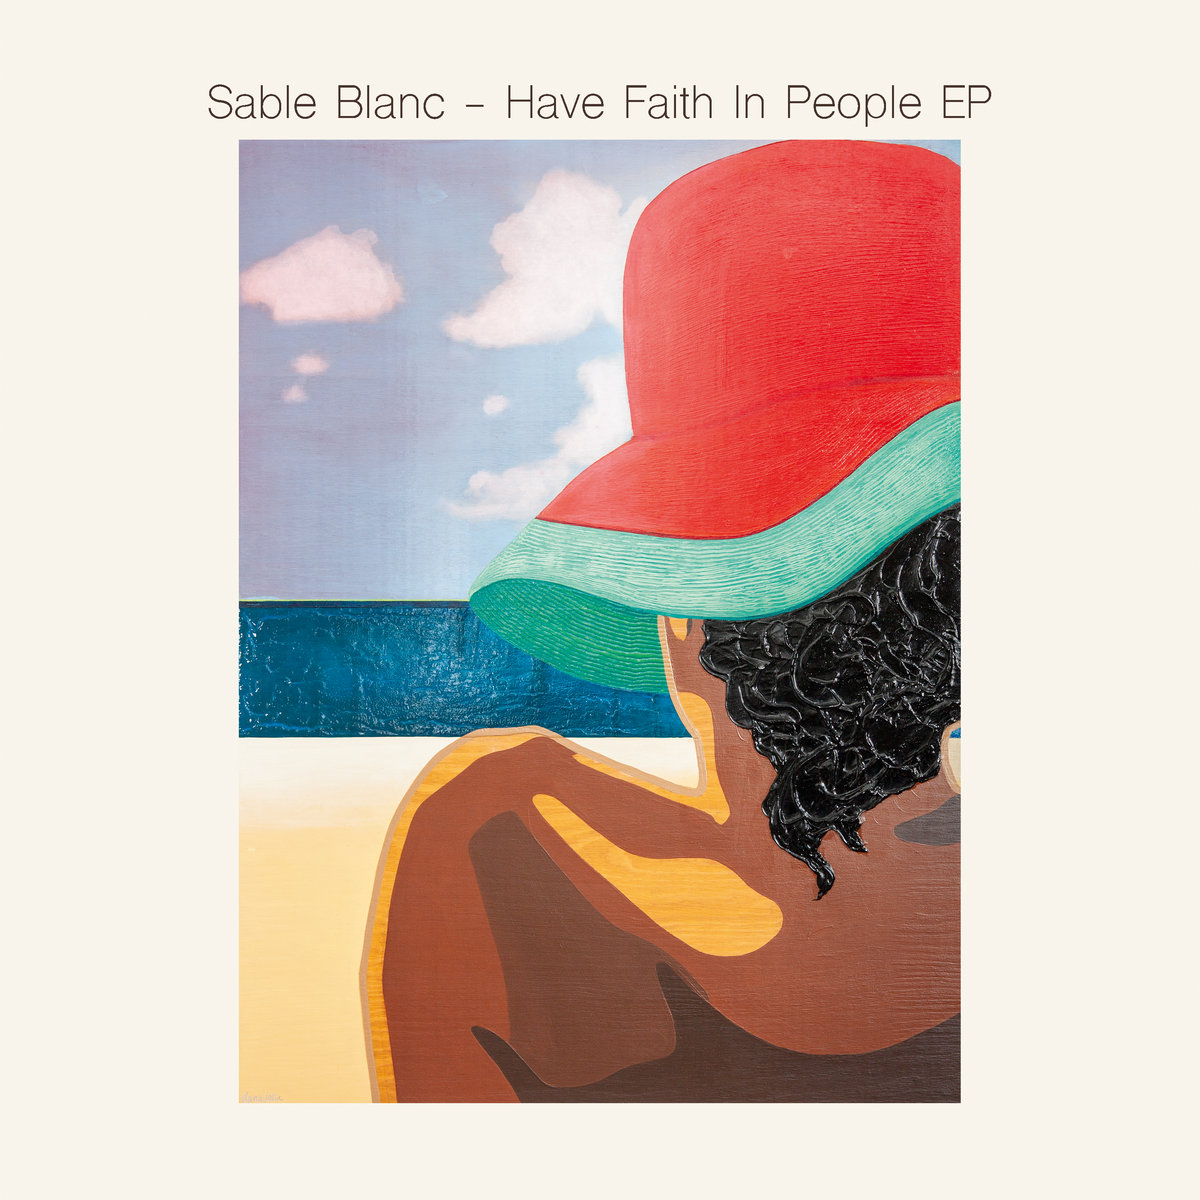 Sable Blanc - Have Faith In People EP (EP Stream)